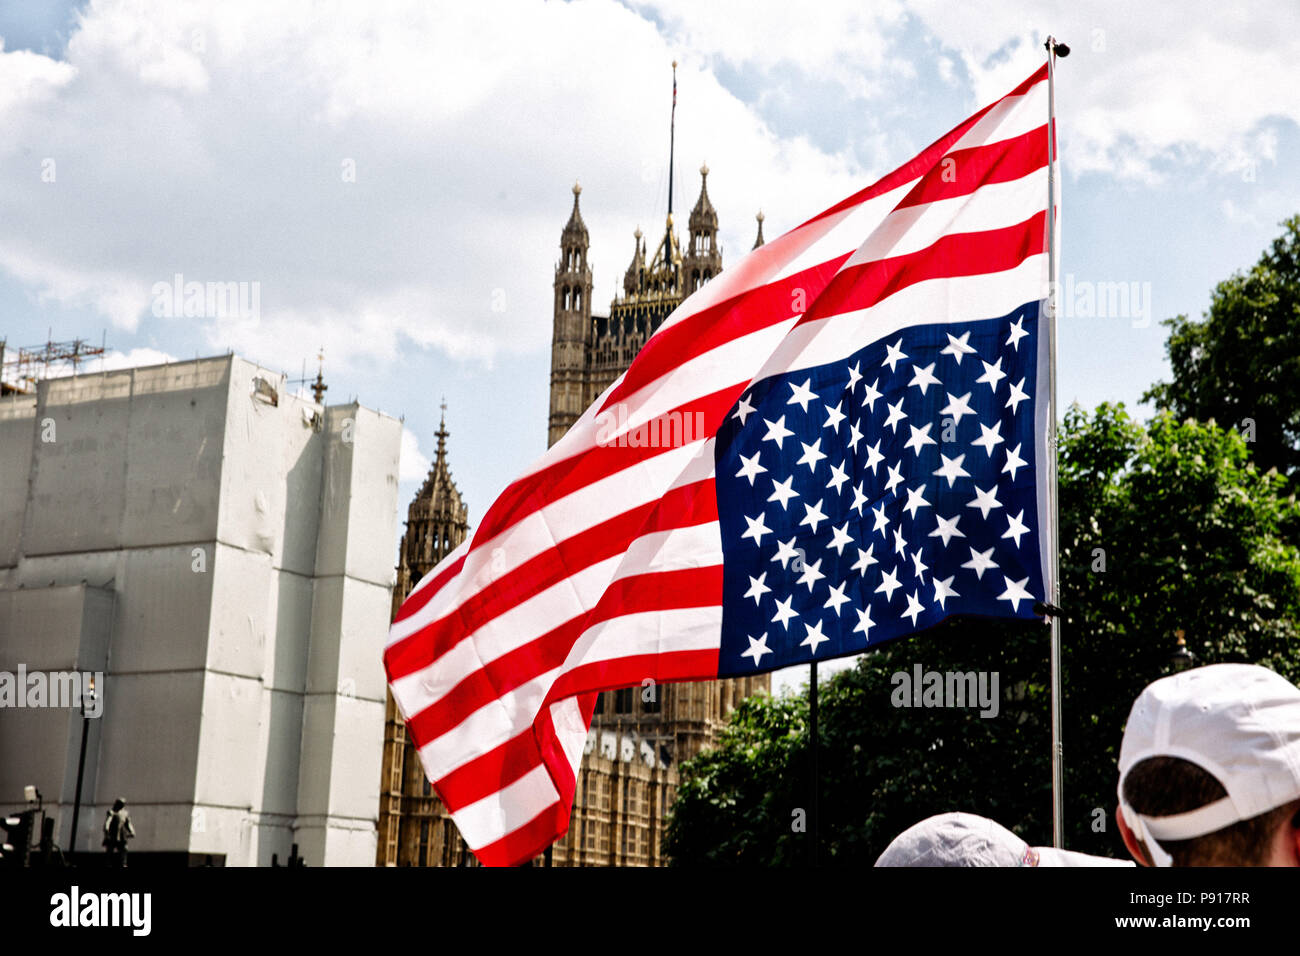 London, England, UK. 13th July, 2018. A US flag is seen flown upside down in front of the UK parliament.Protest by anti-Trump supporters against Donald Trump's visit to the United Kingdom that took place in central London. Credit: Joel Fowler/SOPA Images/ZUMA Wire/Alamy Live News Stock Photo